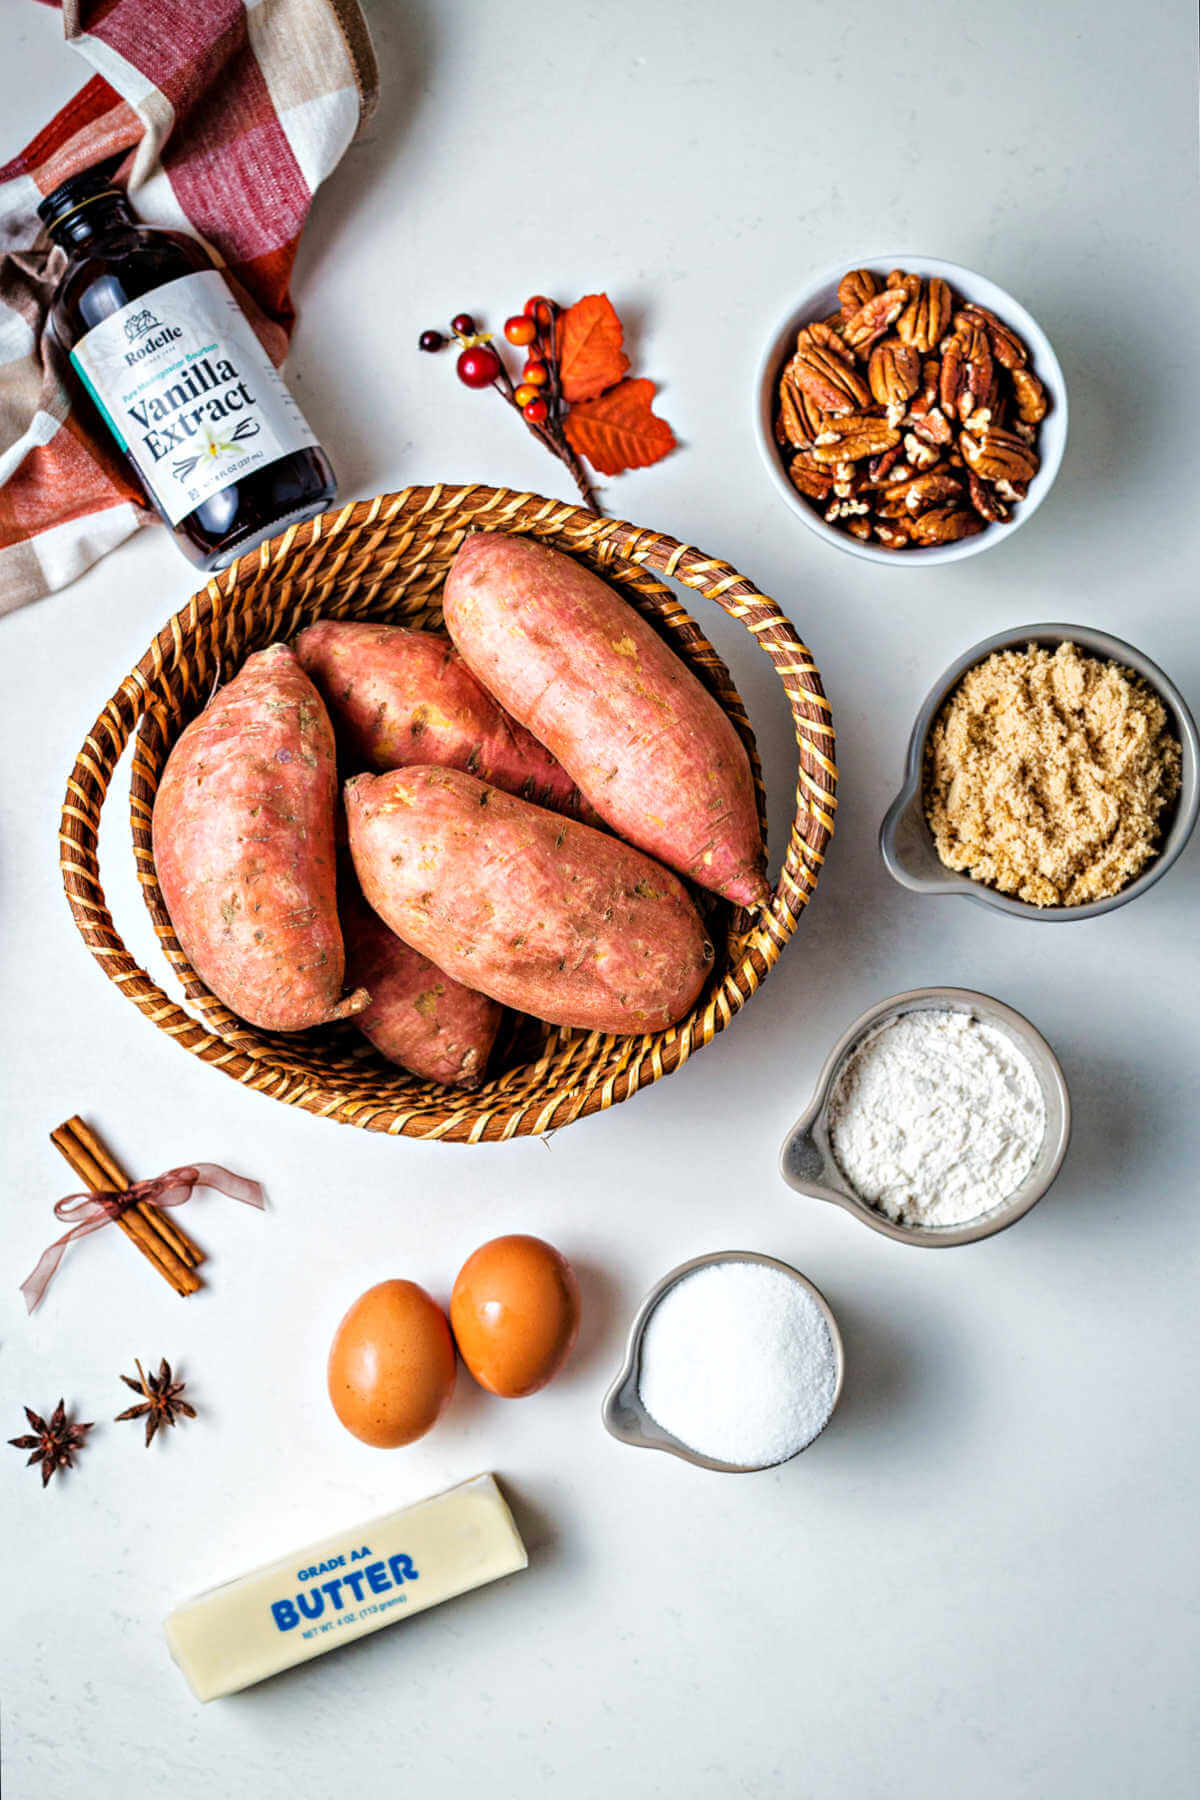 ingredients for sweet potato souffle on a table.